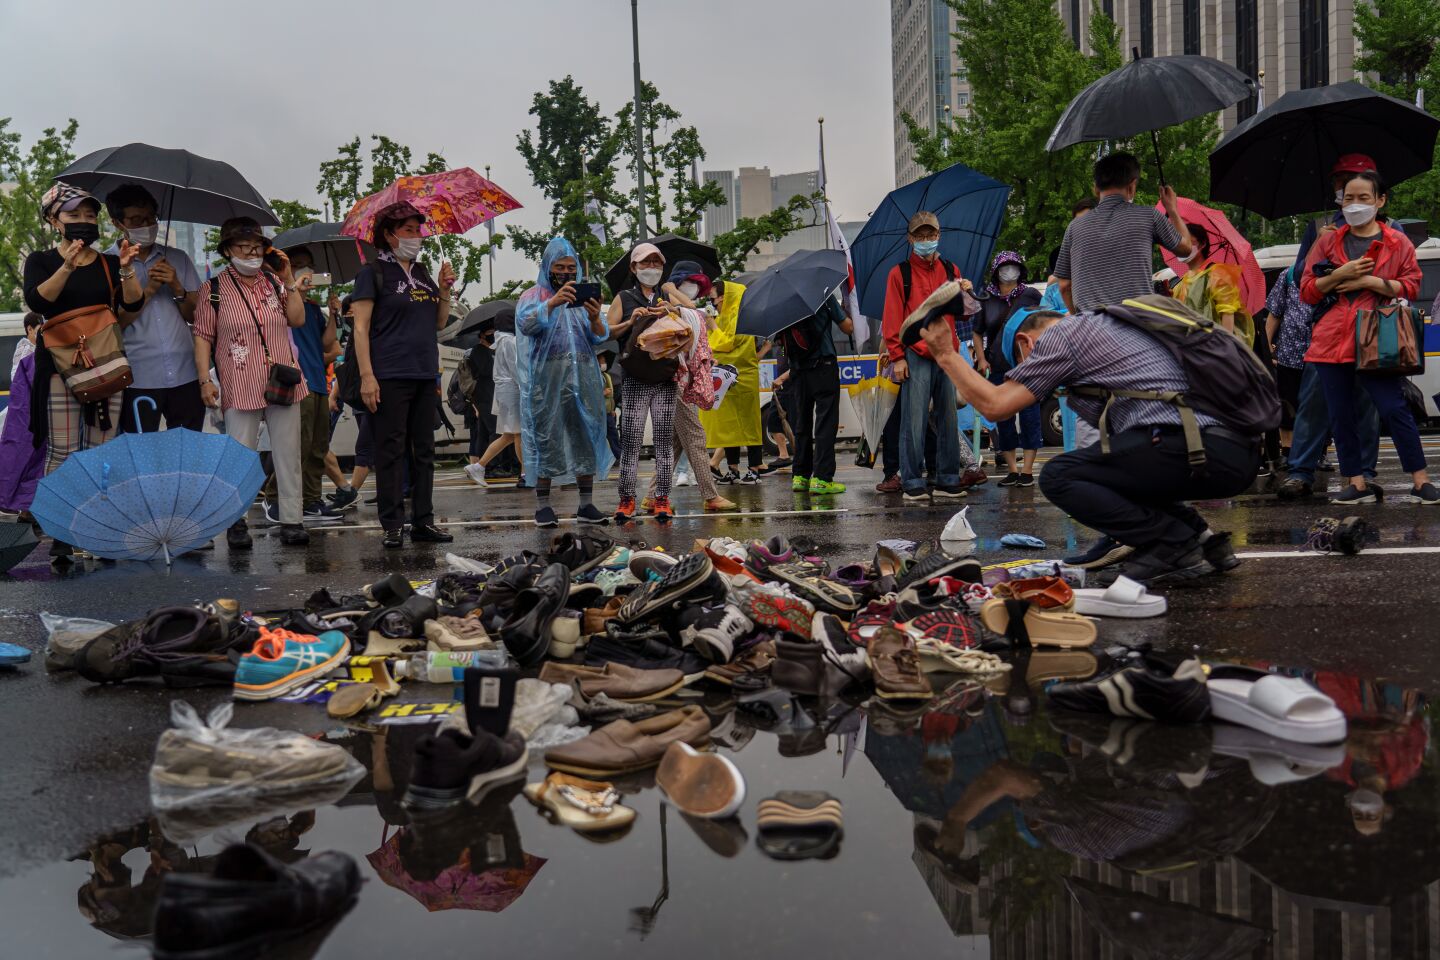 Protesters throw shoes to signal their dissatisfaction with the government.